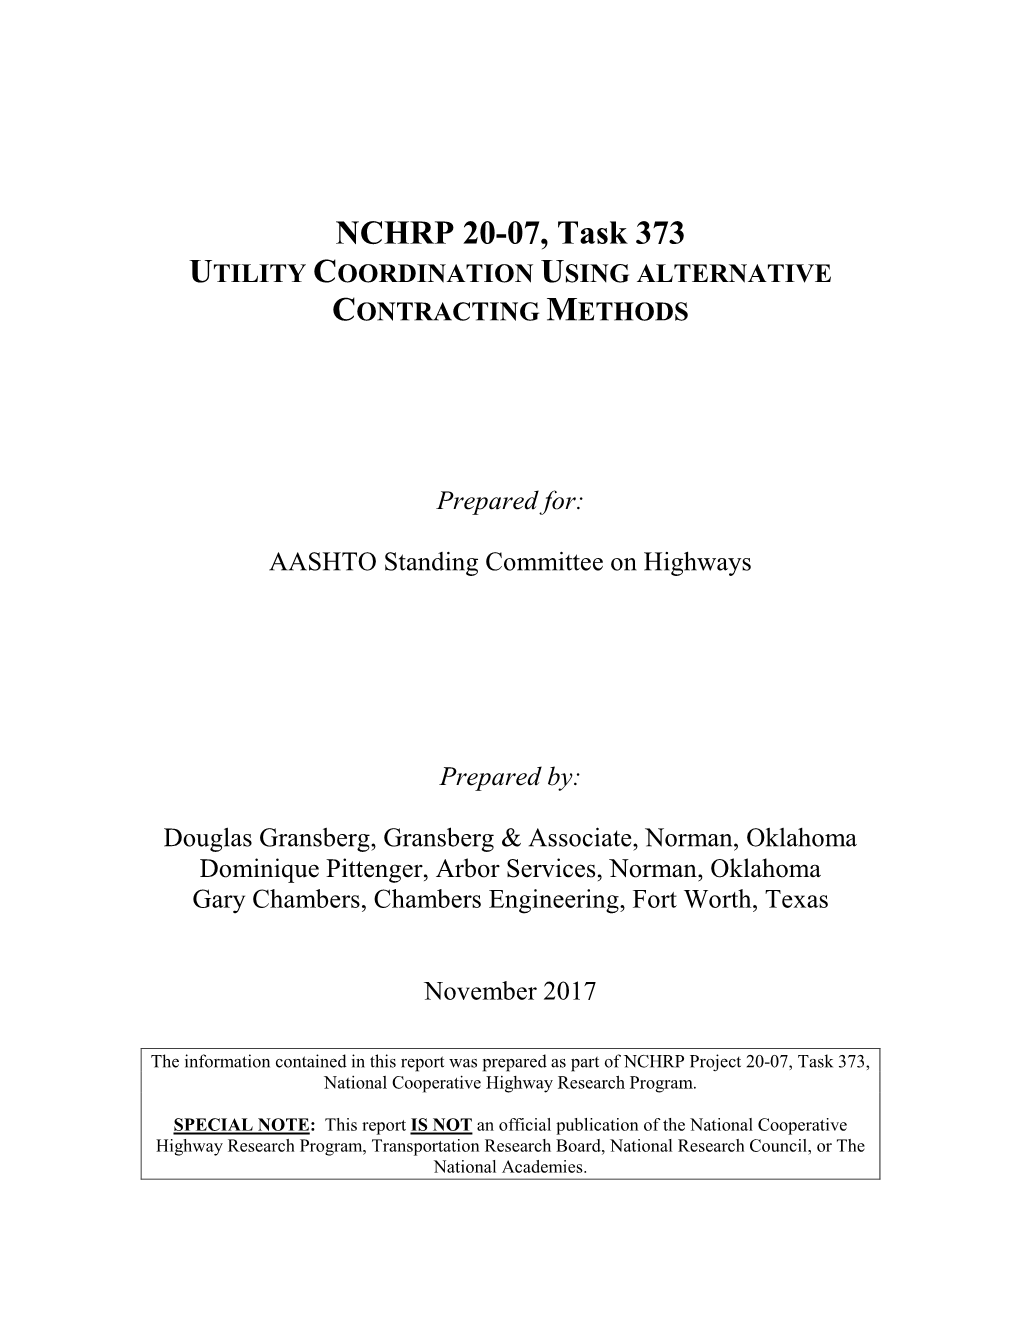 NCHRP 20-07, Task 373 UTILITY COORDINATION USING ALTERNATIVE CONTRACTING METHODS